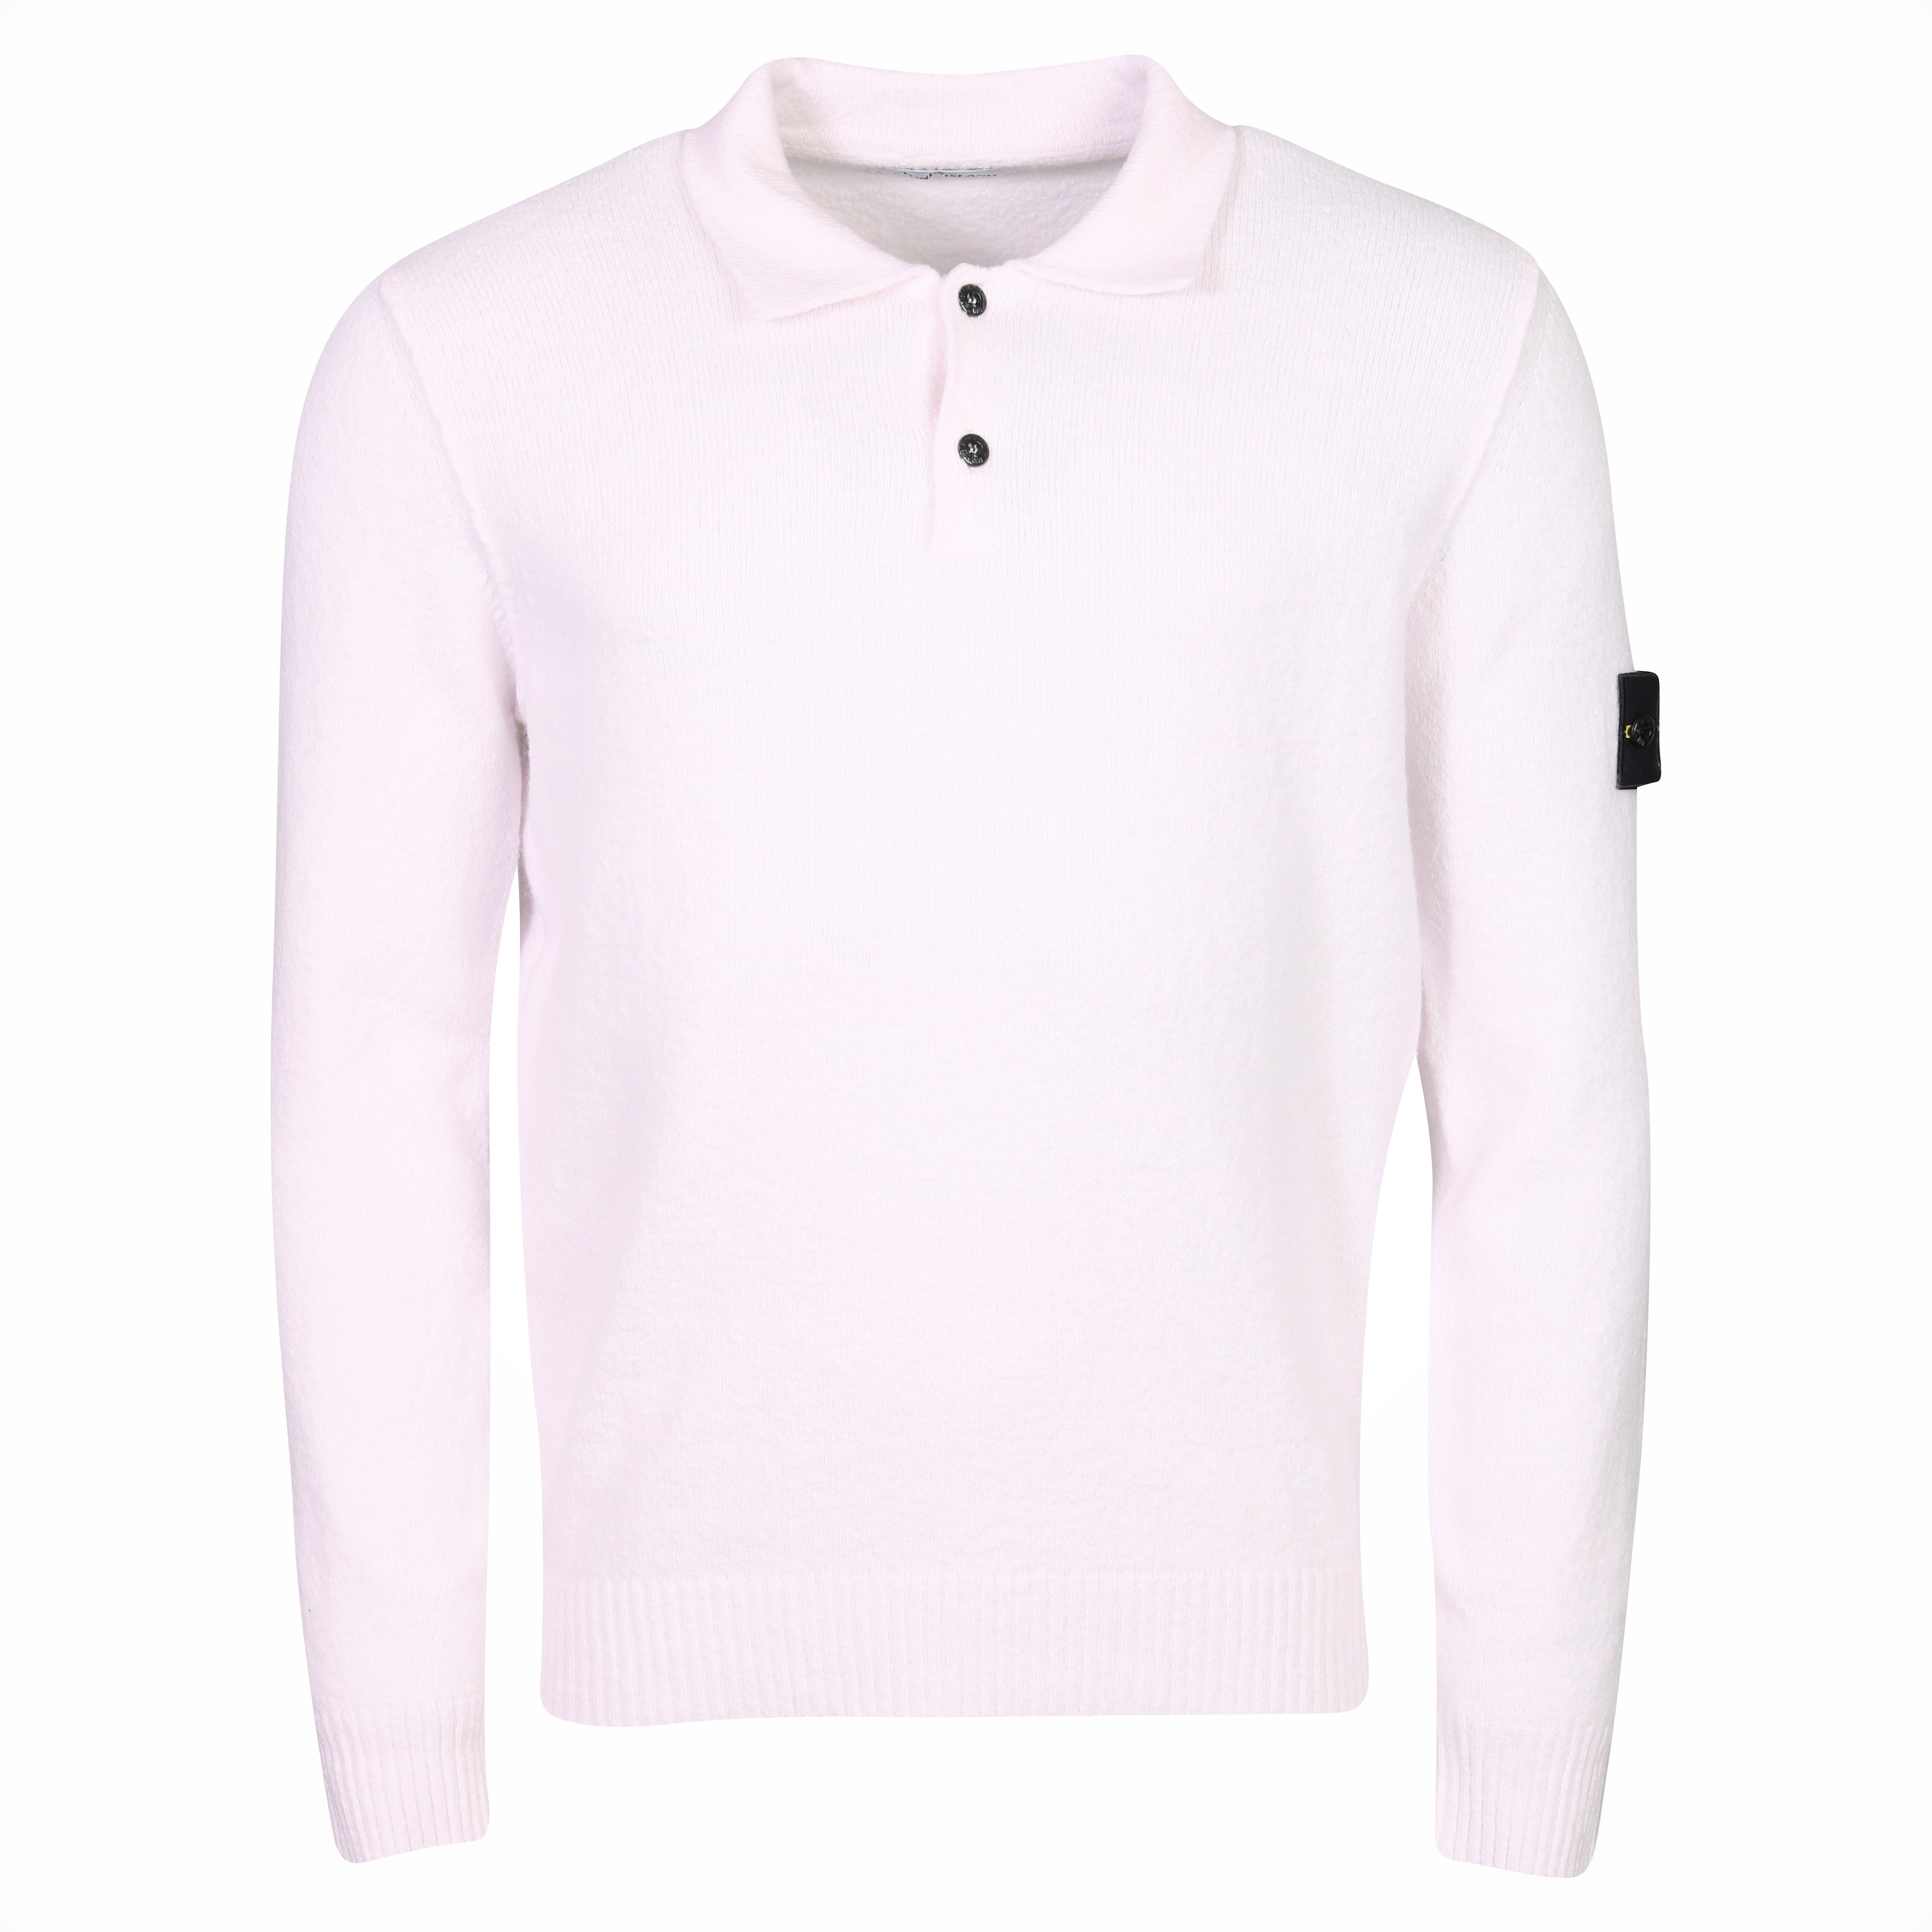 Stone Island Polo Knit Sweater in Light Pink 2XL